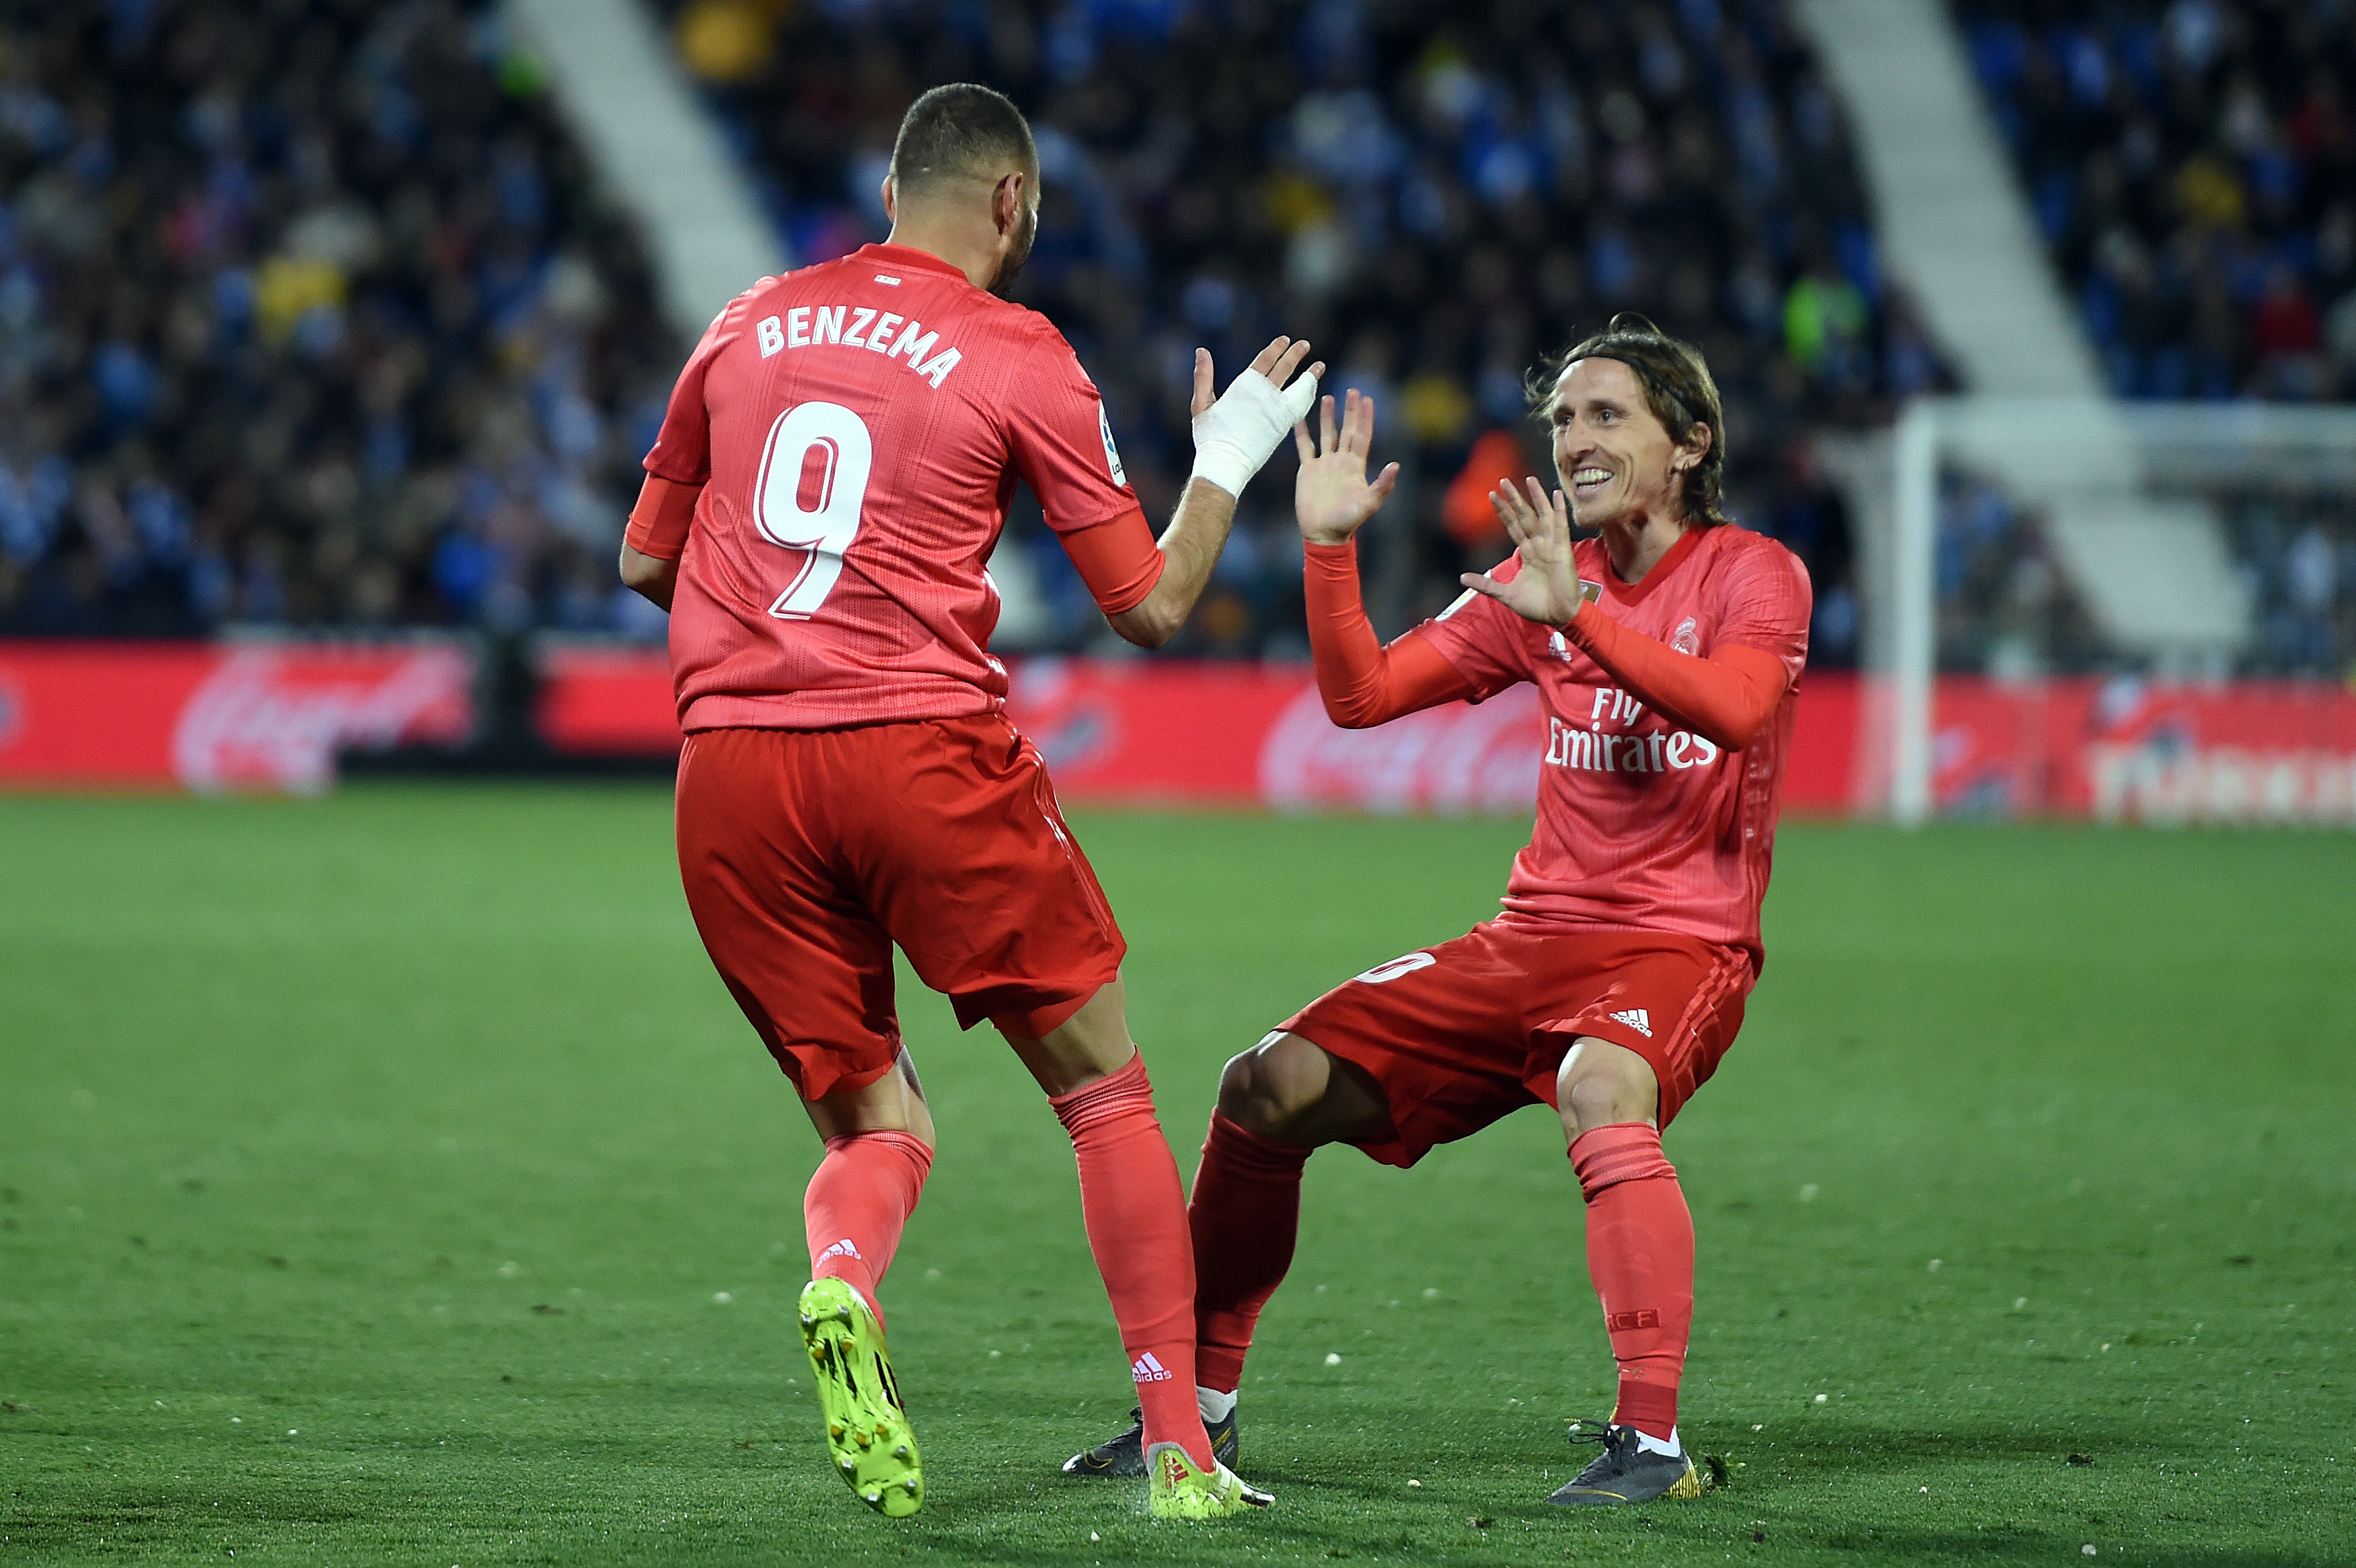 Modric provided the assist for Benzema's goal. (Photo by Denis Doyle/Getty Images)